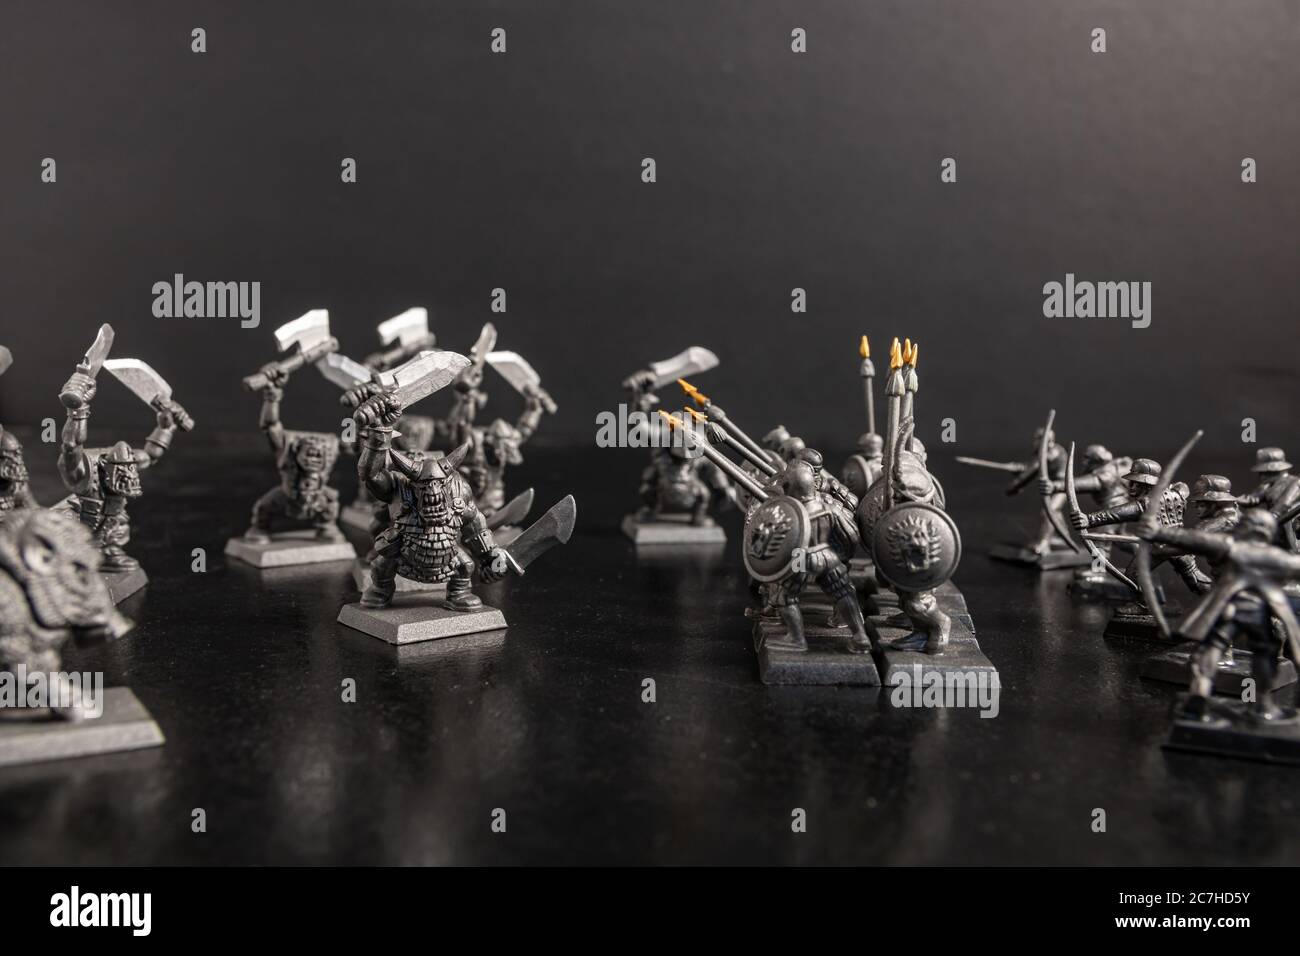 Grayscale selective focus shot of mythical creatures near soldiers with spear figurines Stock Photo